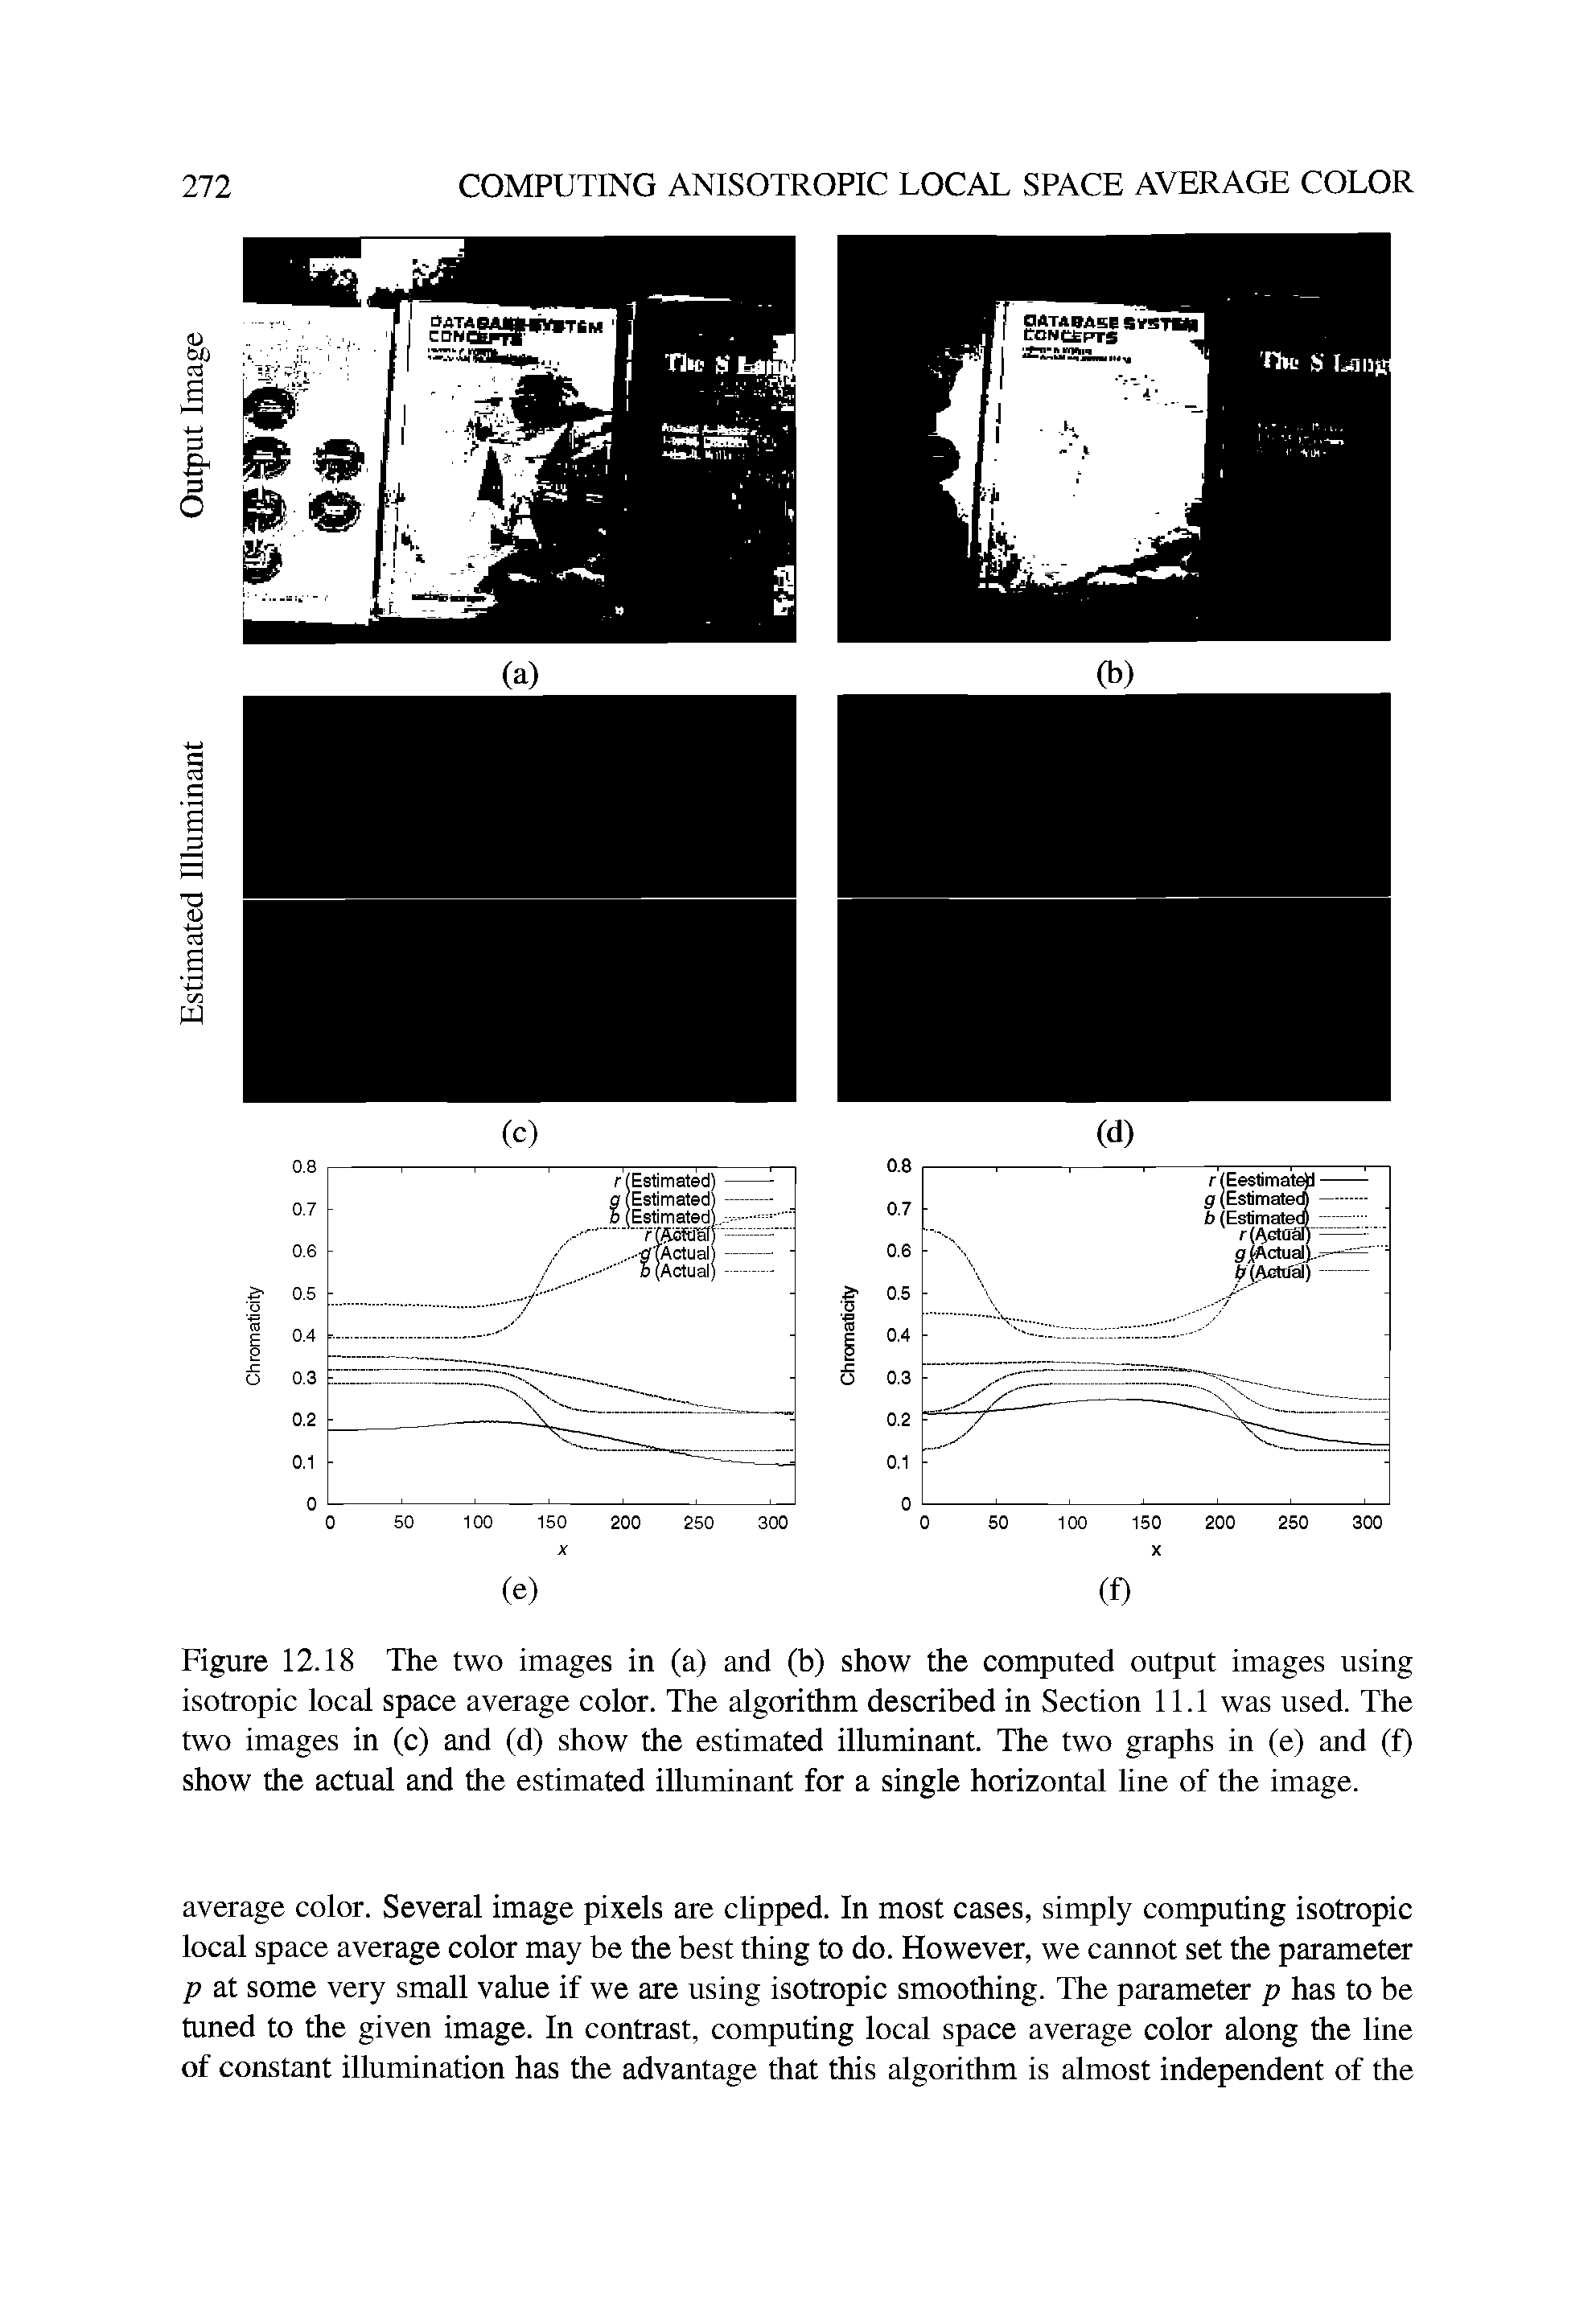 Figure 12.18 The two images in (a) and (b) show the computed output images using isotropic local space average color. The algorithm described in Section 11.1 was used. The two images in (c) and (d) show the estimated illuminant. The two graphs in (e) and (f) show the actual and the estimated illuminant for a single horizontal line of the image.